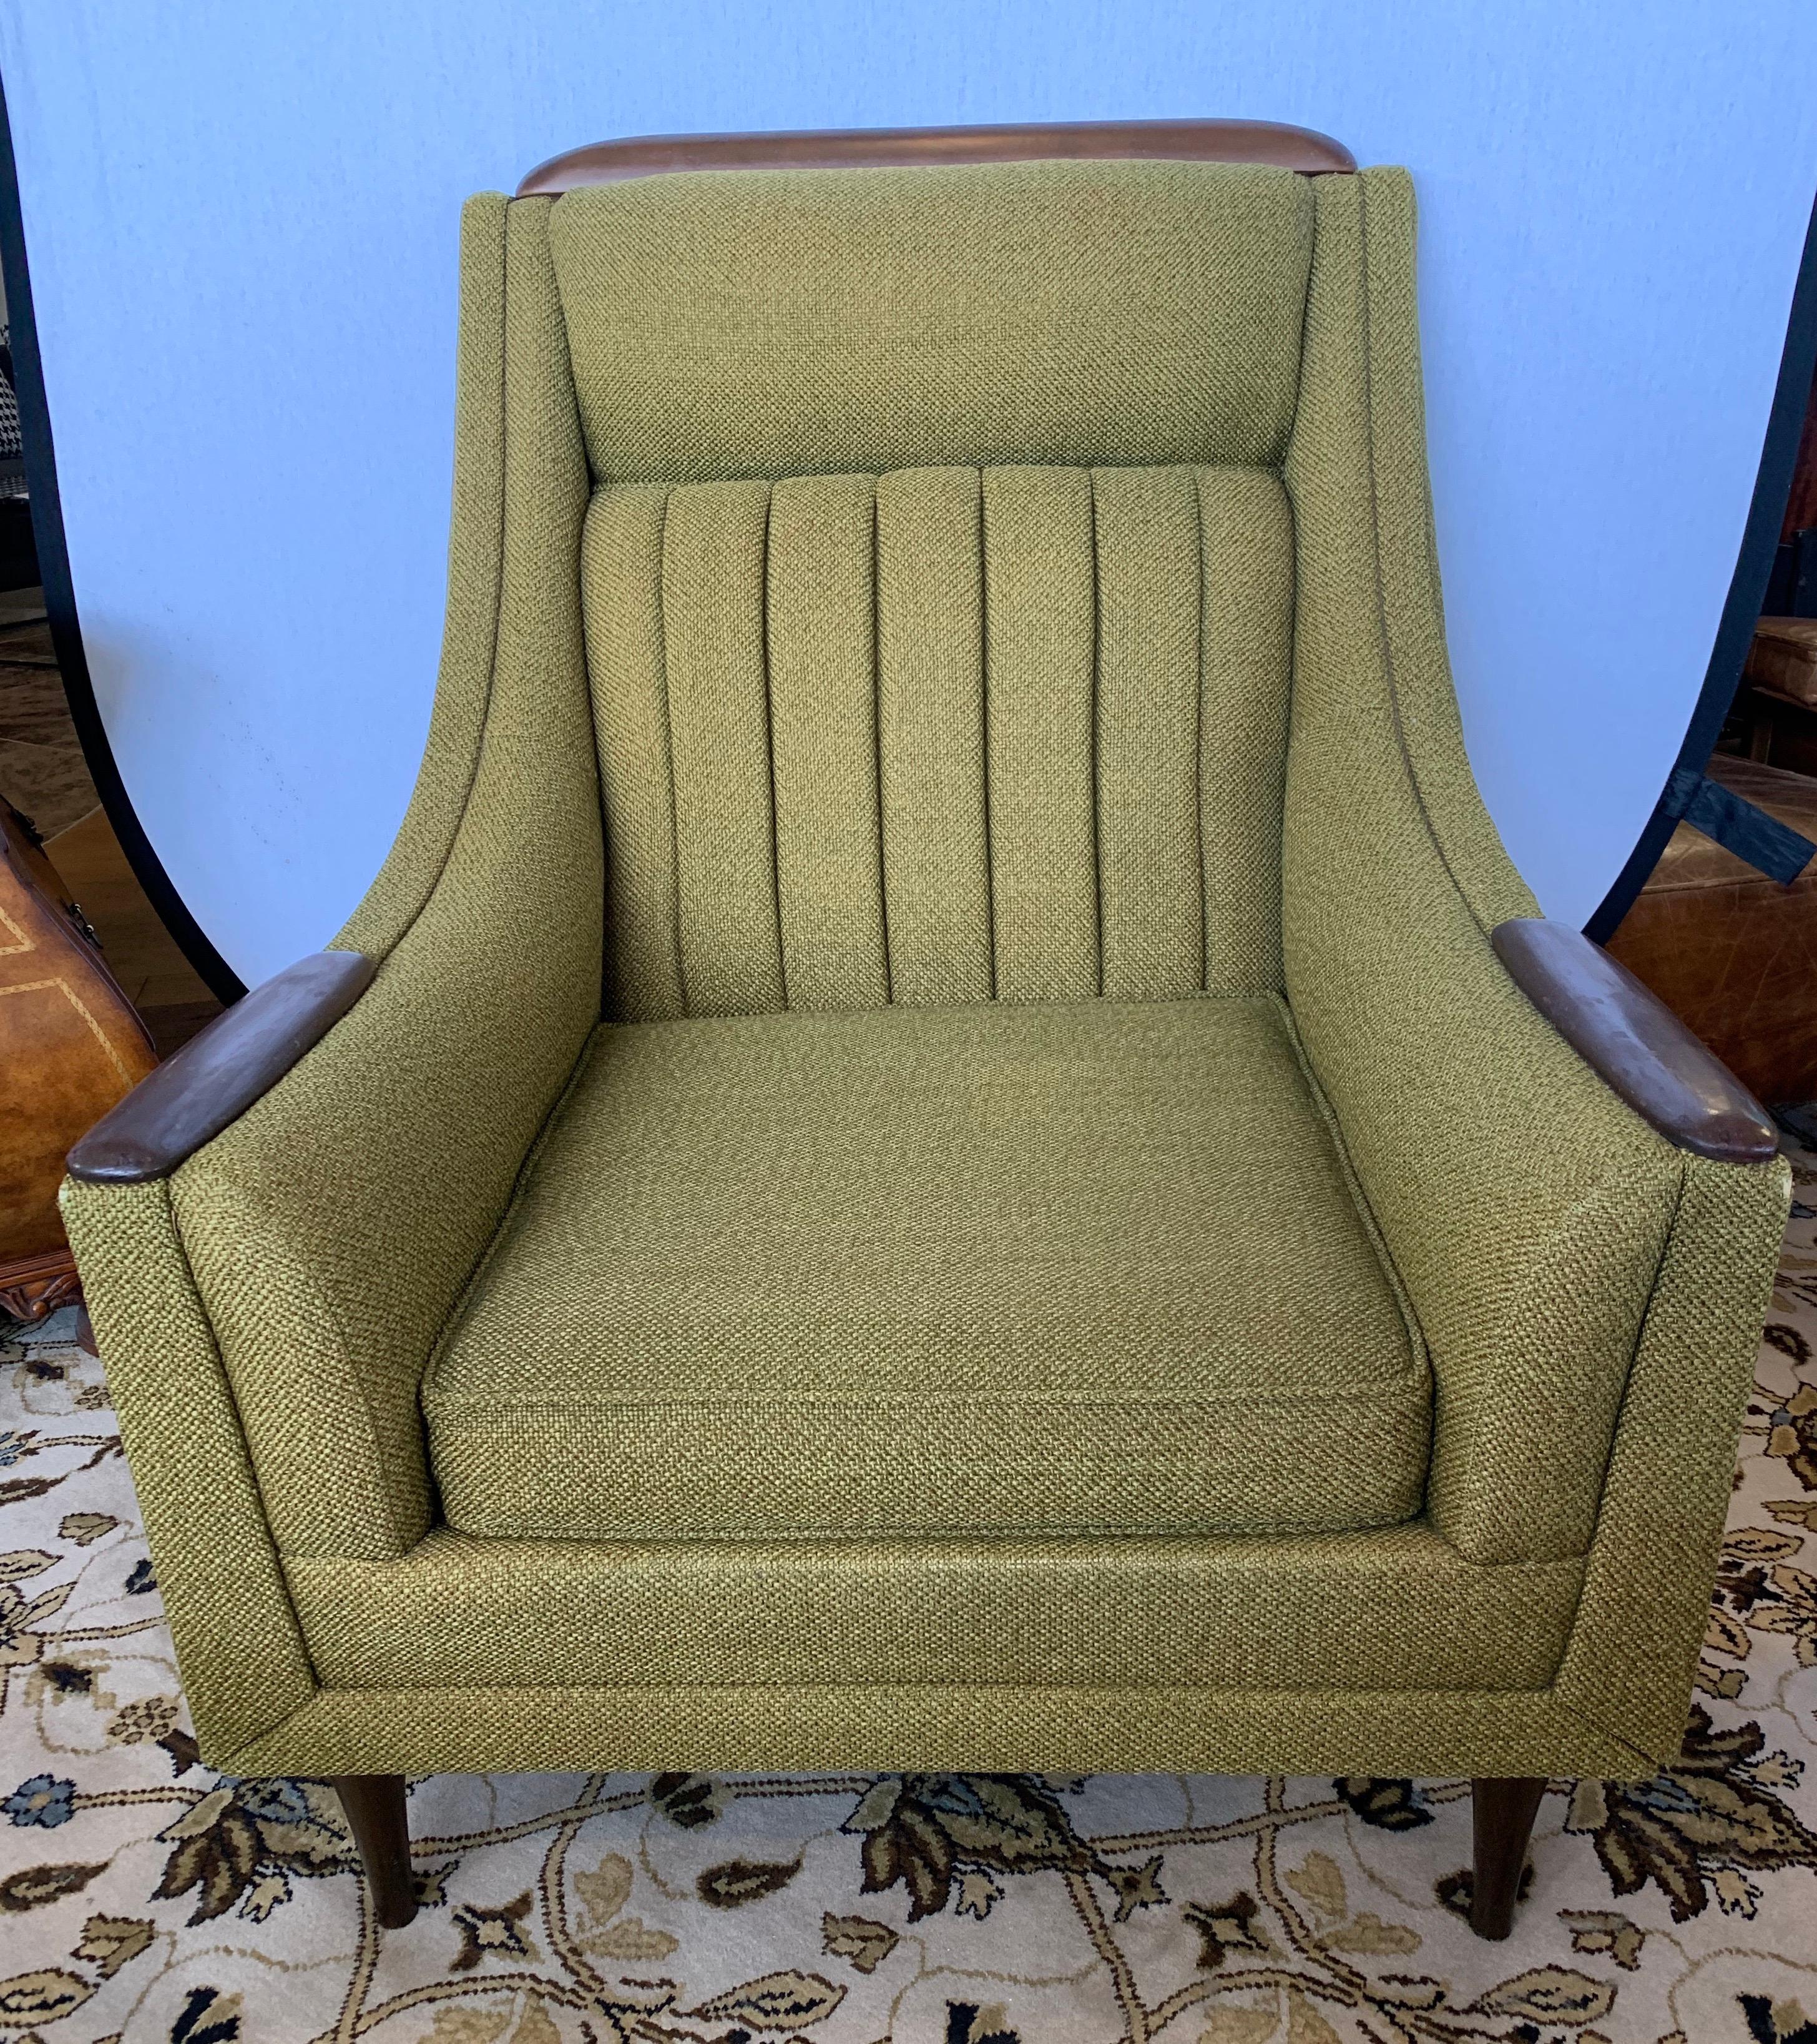 Rare Kroehler midcentury lounge chair with all original fabric. Given its age, early 1970s, it is still
in very good condition. The fabric is also very good with wear near armrest at corners.